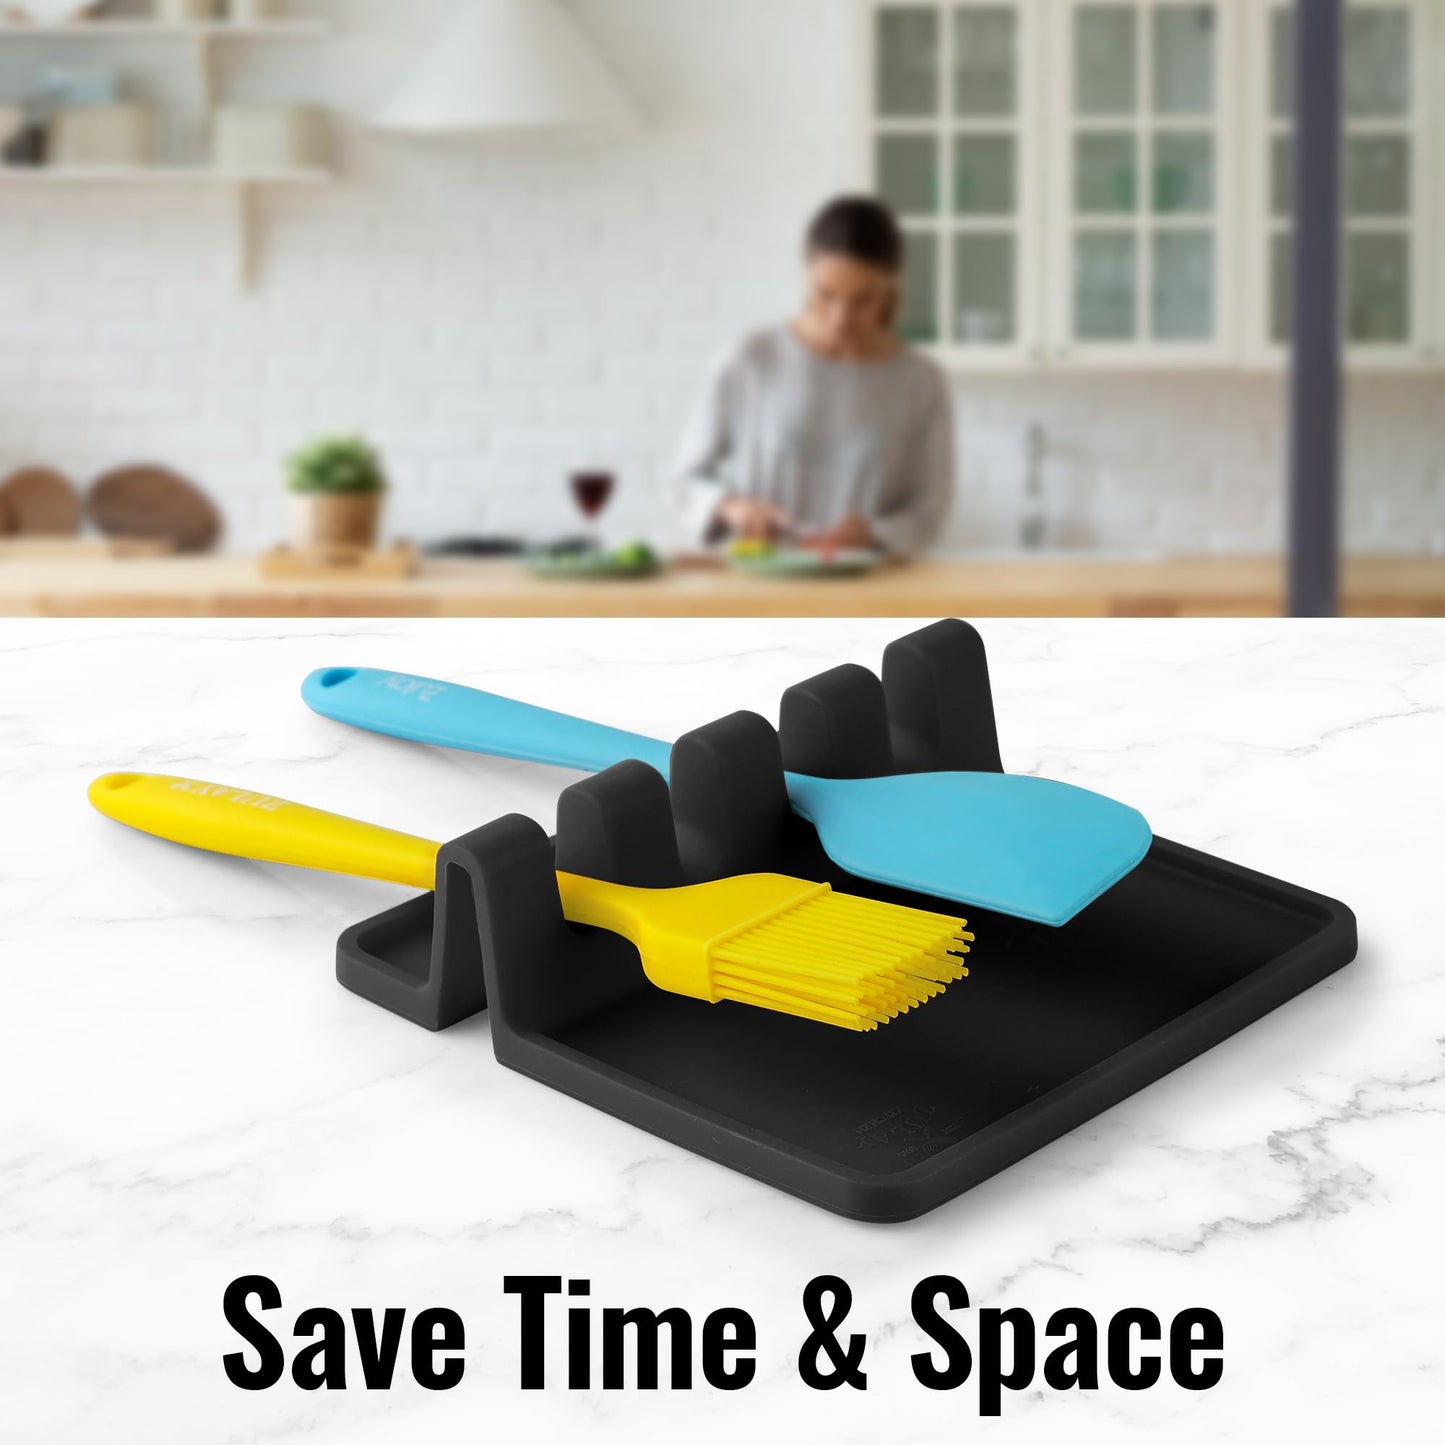 Zulay Kitchen Silicone Utensil Rest with Drip Pad for Multiple Utensils - BPA-Free, Heat-Resistant Spoon Rest & Spoon Holder for Stove Top - Kitchen Utensil Holder for Ladles & Tongs - Black